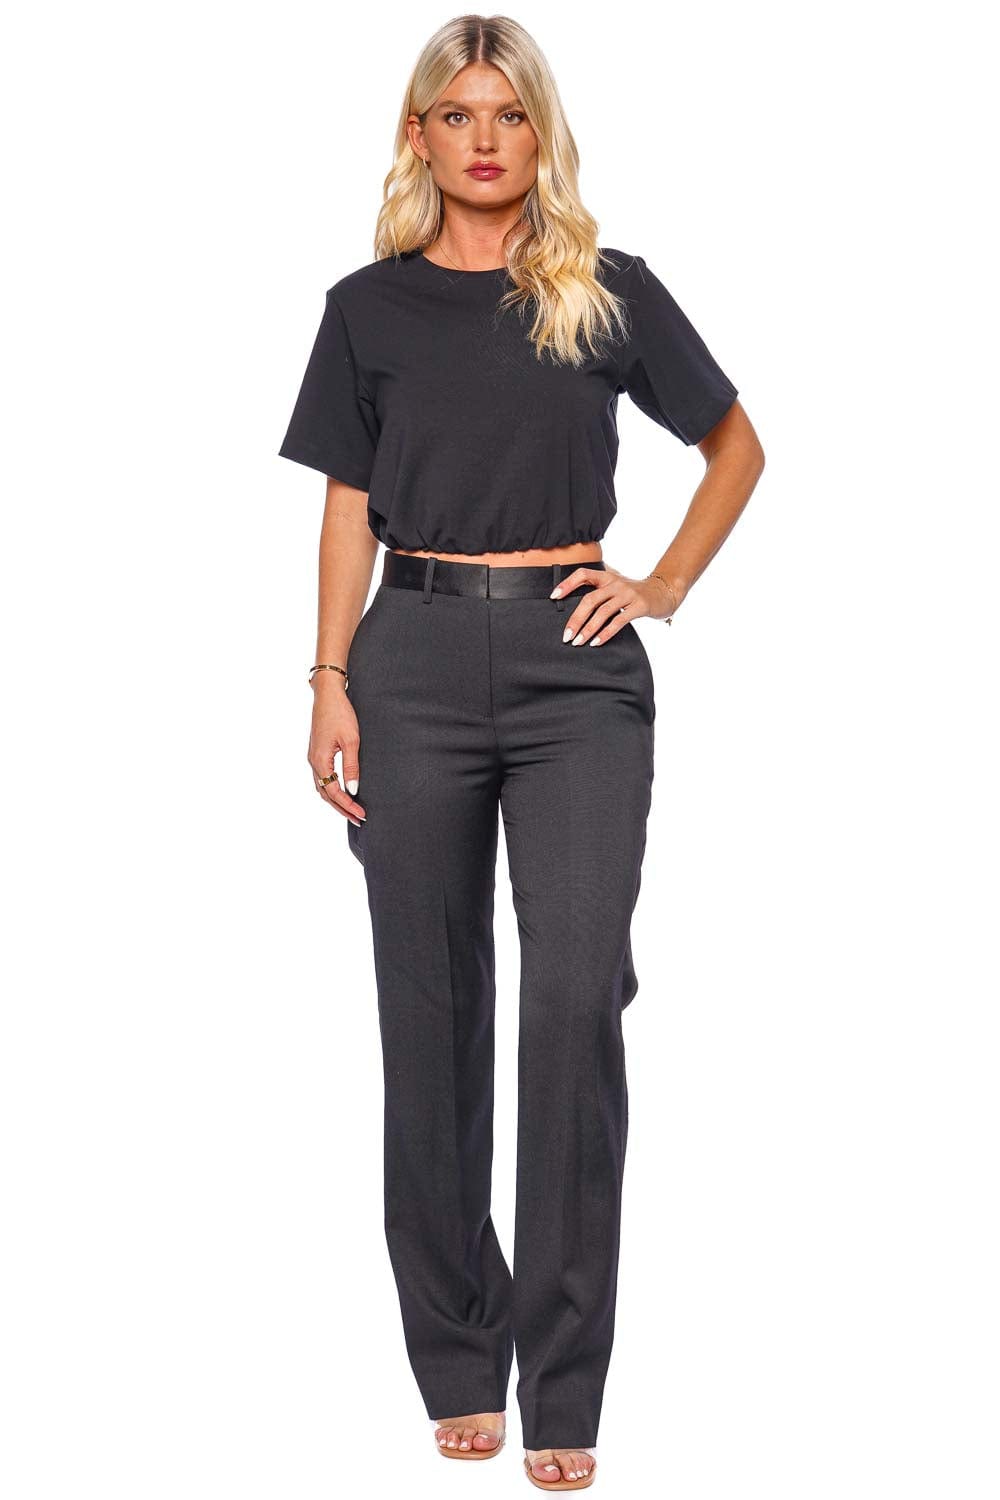 Victoria Beckham Black Pleated Tapered Trouser